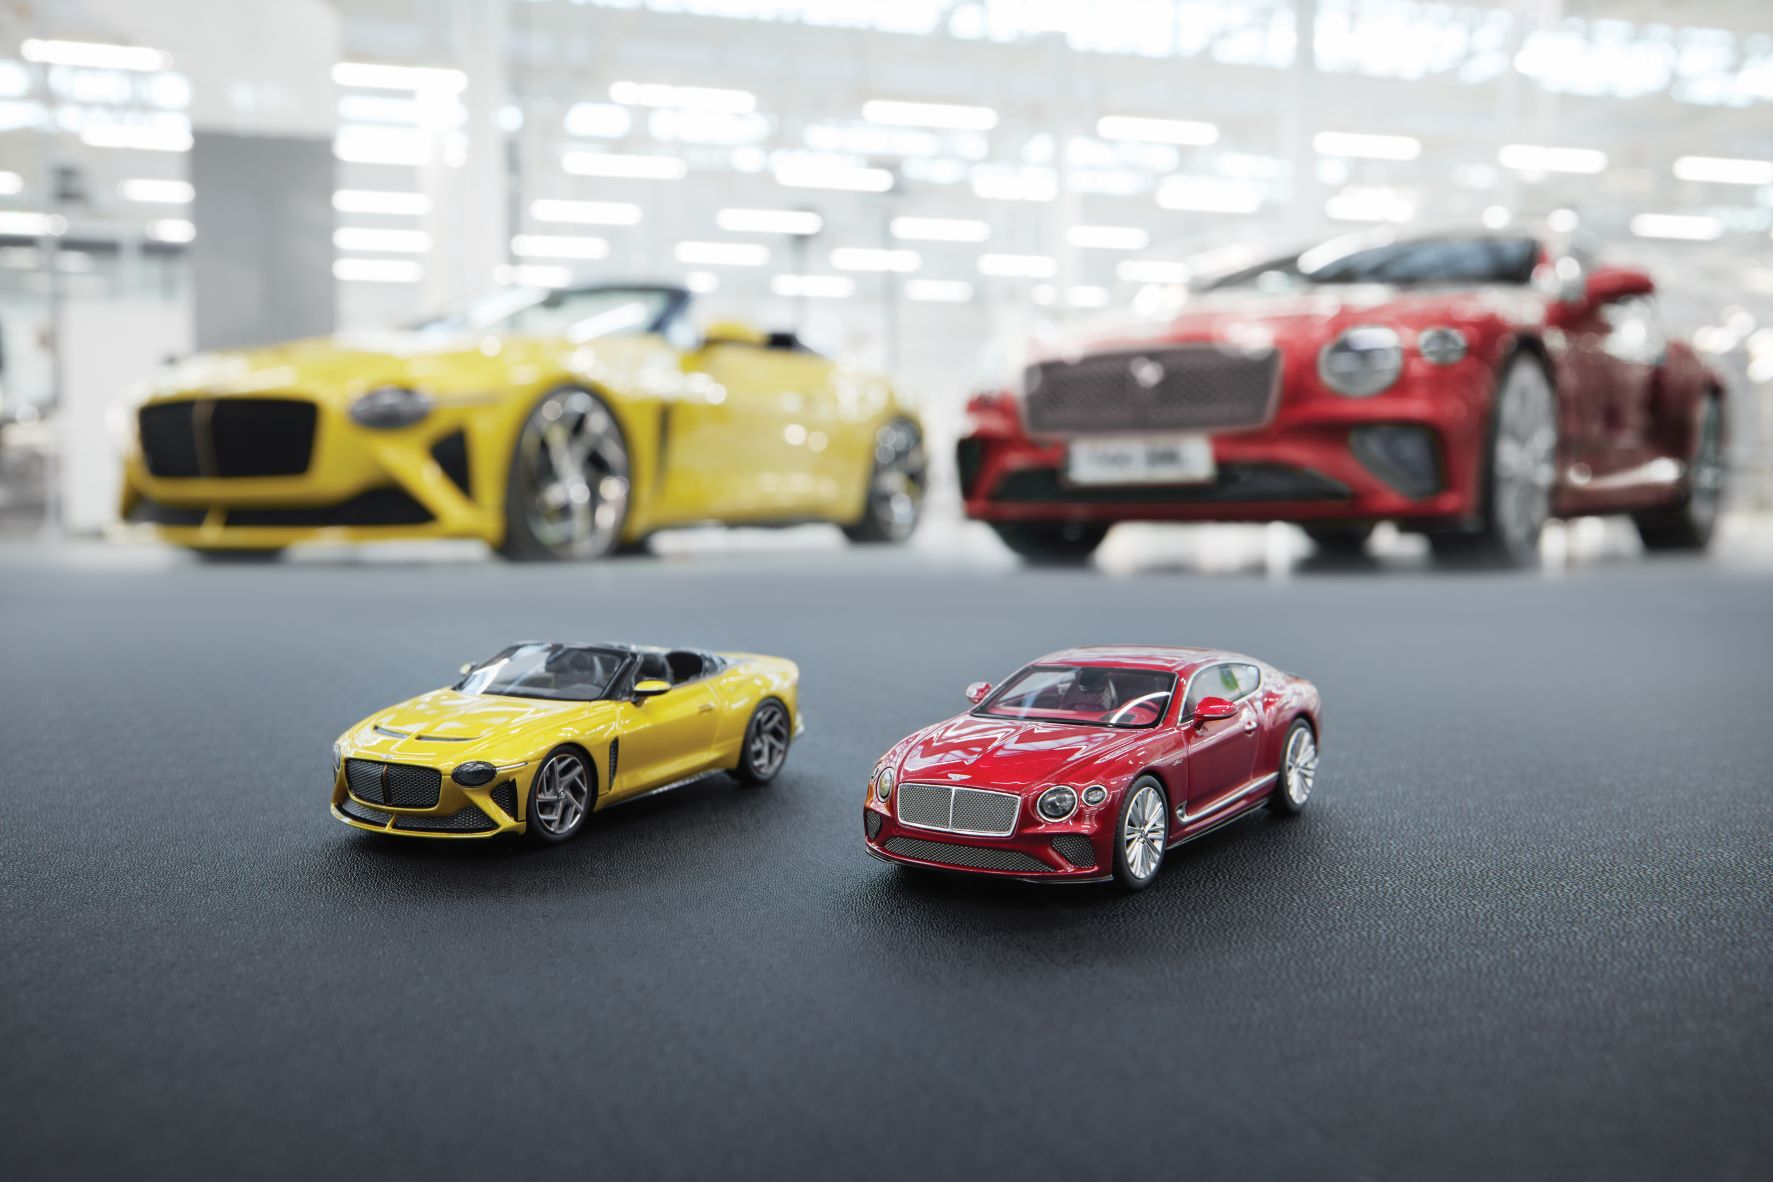 A yellow Bentley Bacalar model car and a red Bentley Continental GT Speed model car in front of the life sized cars.